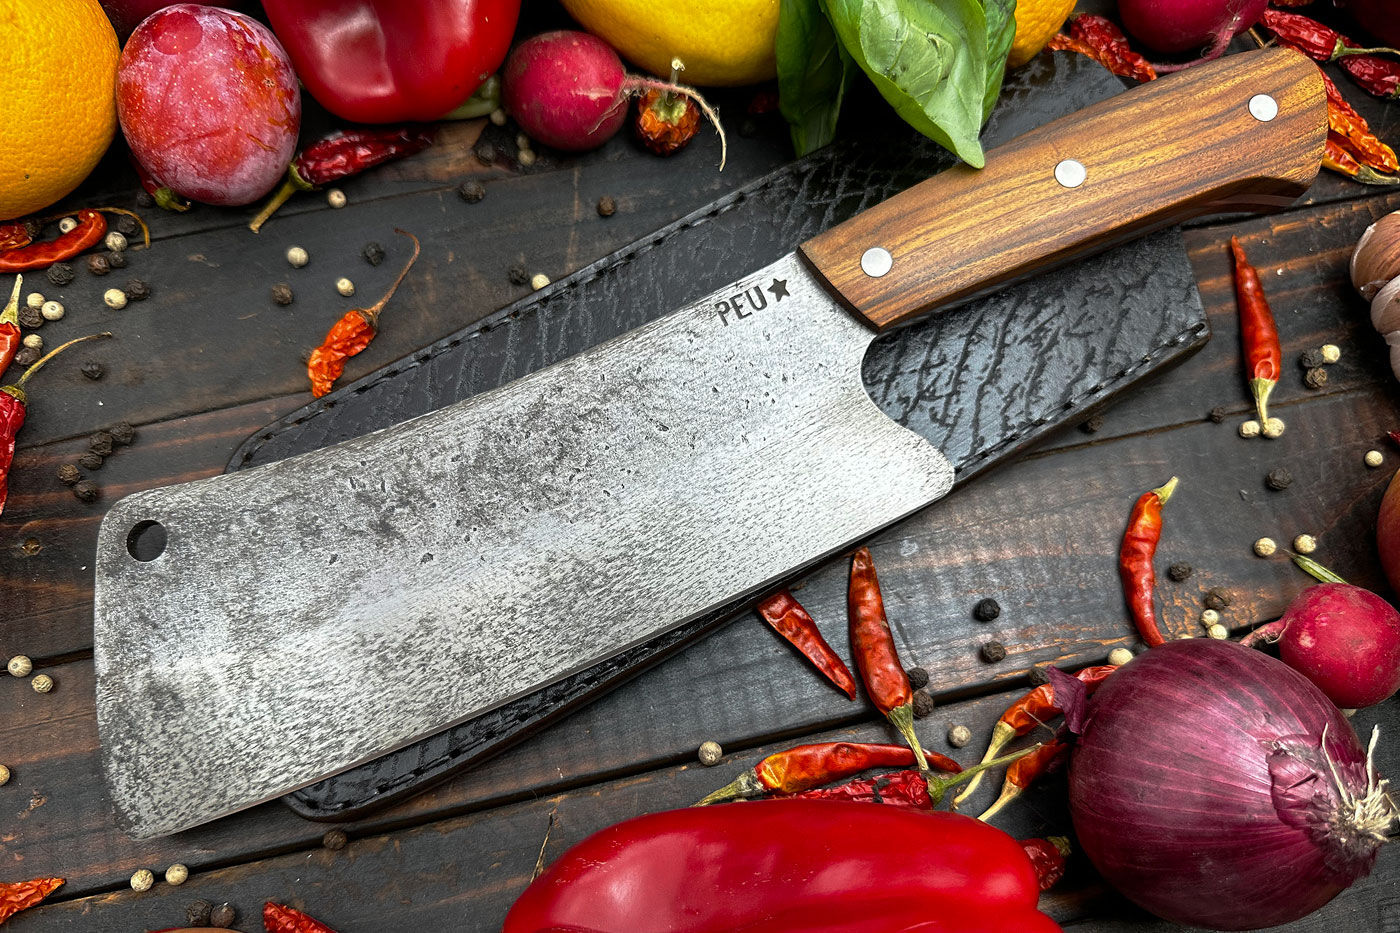 Meat Cleaver with Jacaranda and O2 Carbon Steel